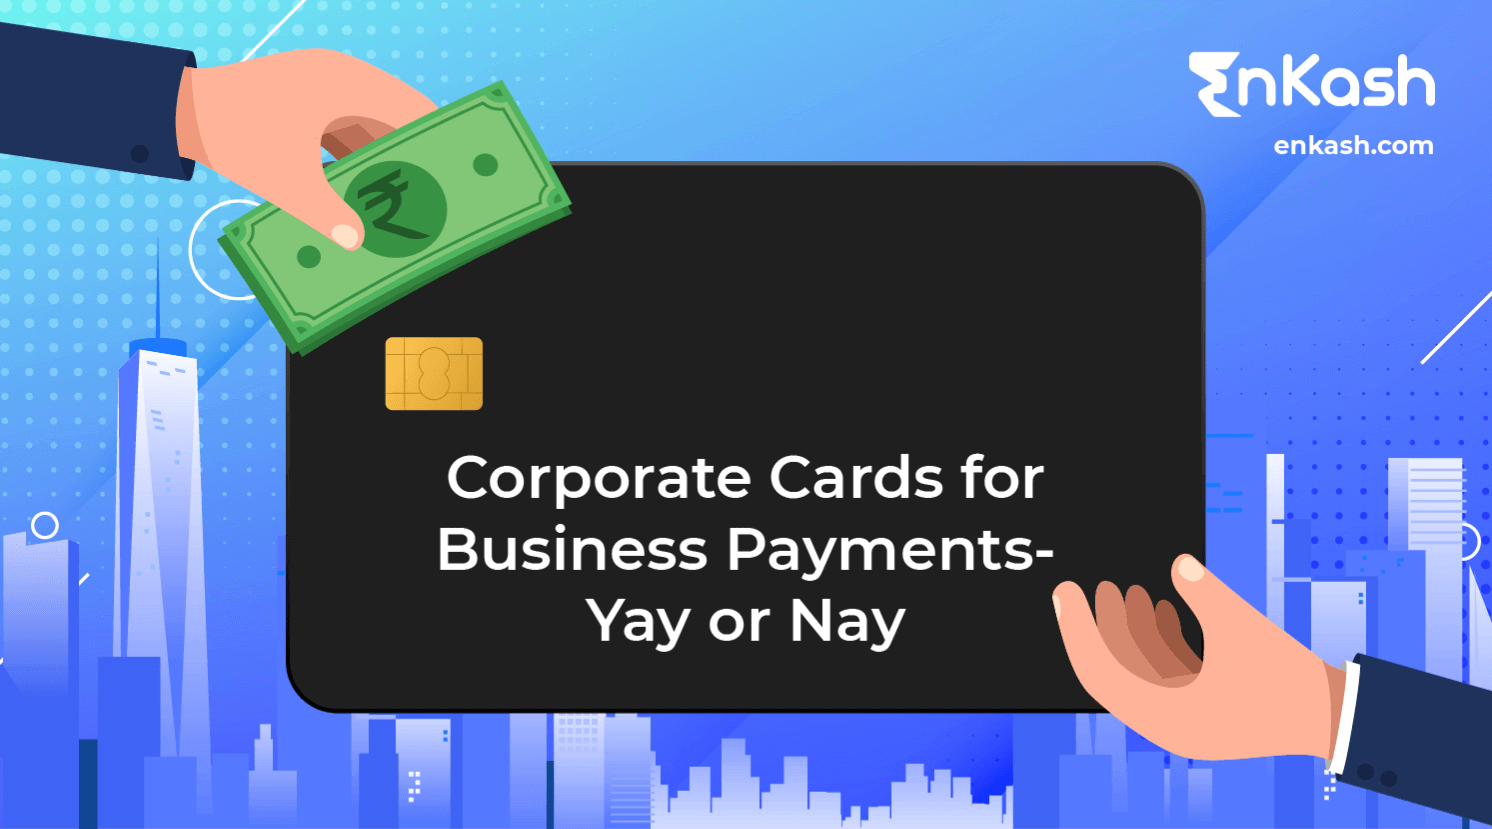 Corporate Cards for Business Payments